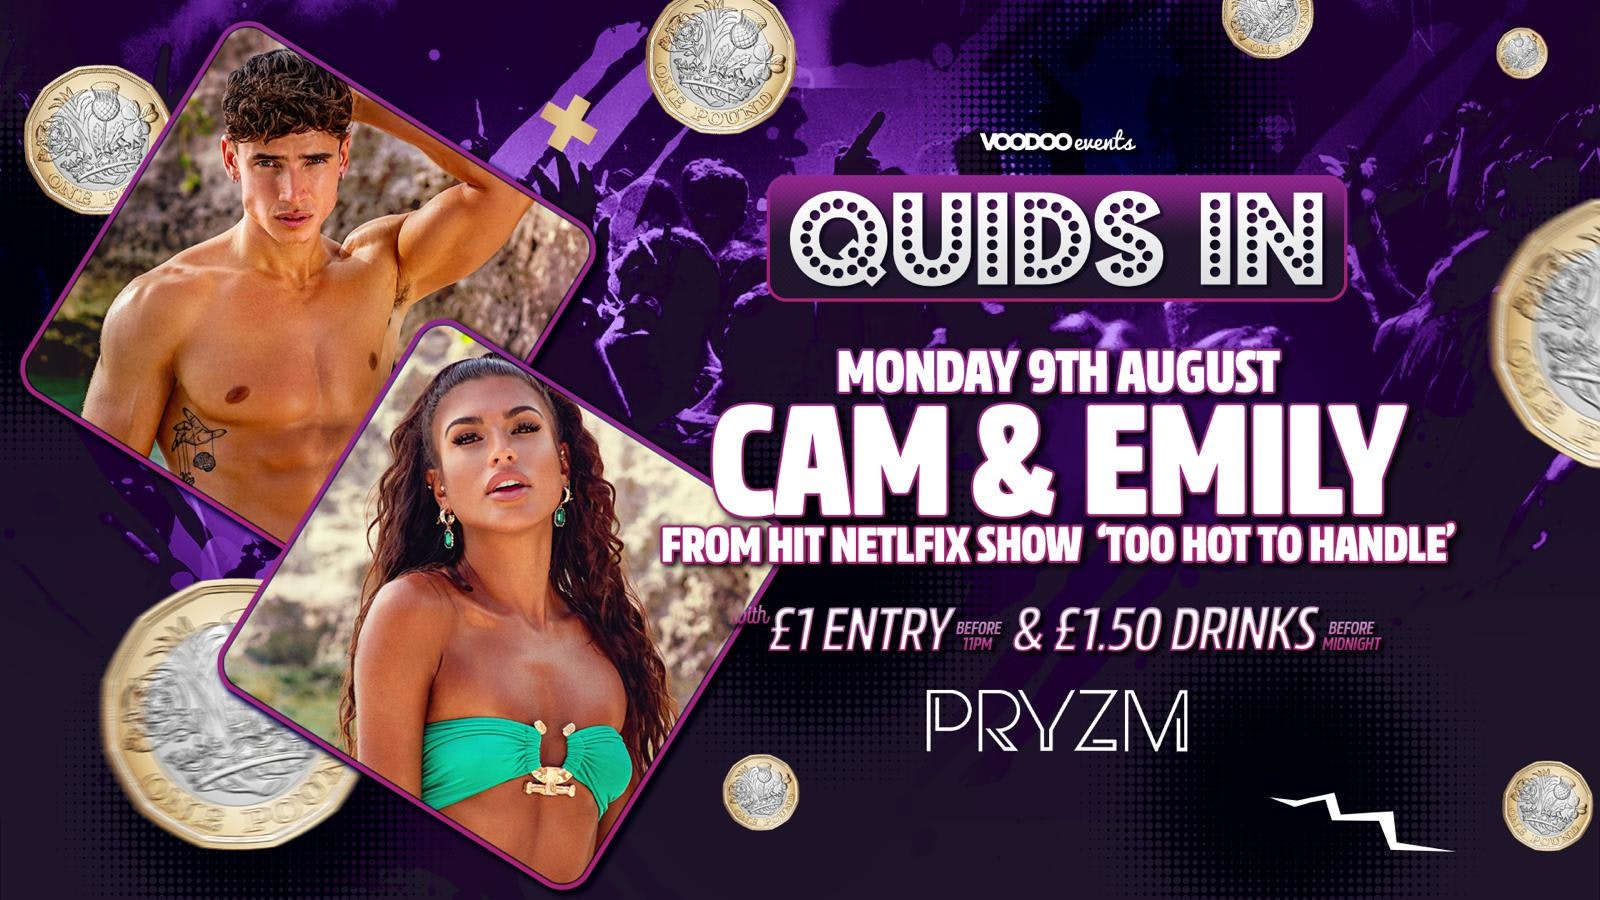 Quids In Mondays at PRYZM Presents Cam & Emily from To Hot To Handle – 9th August